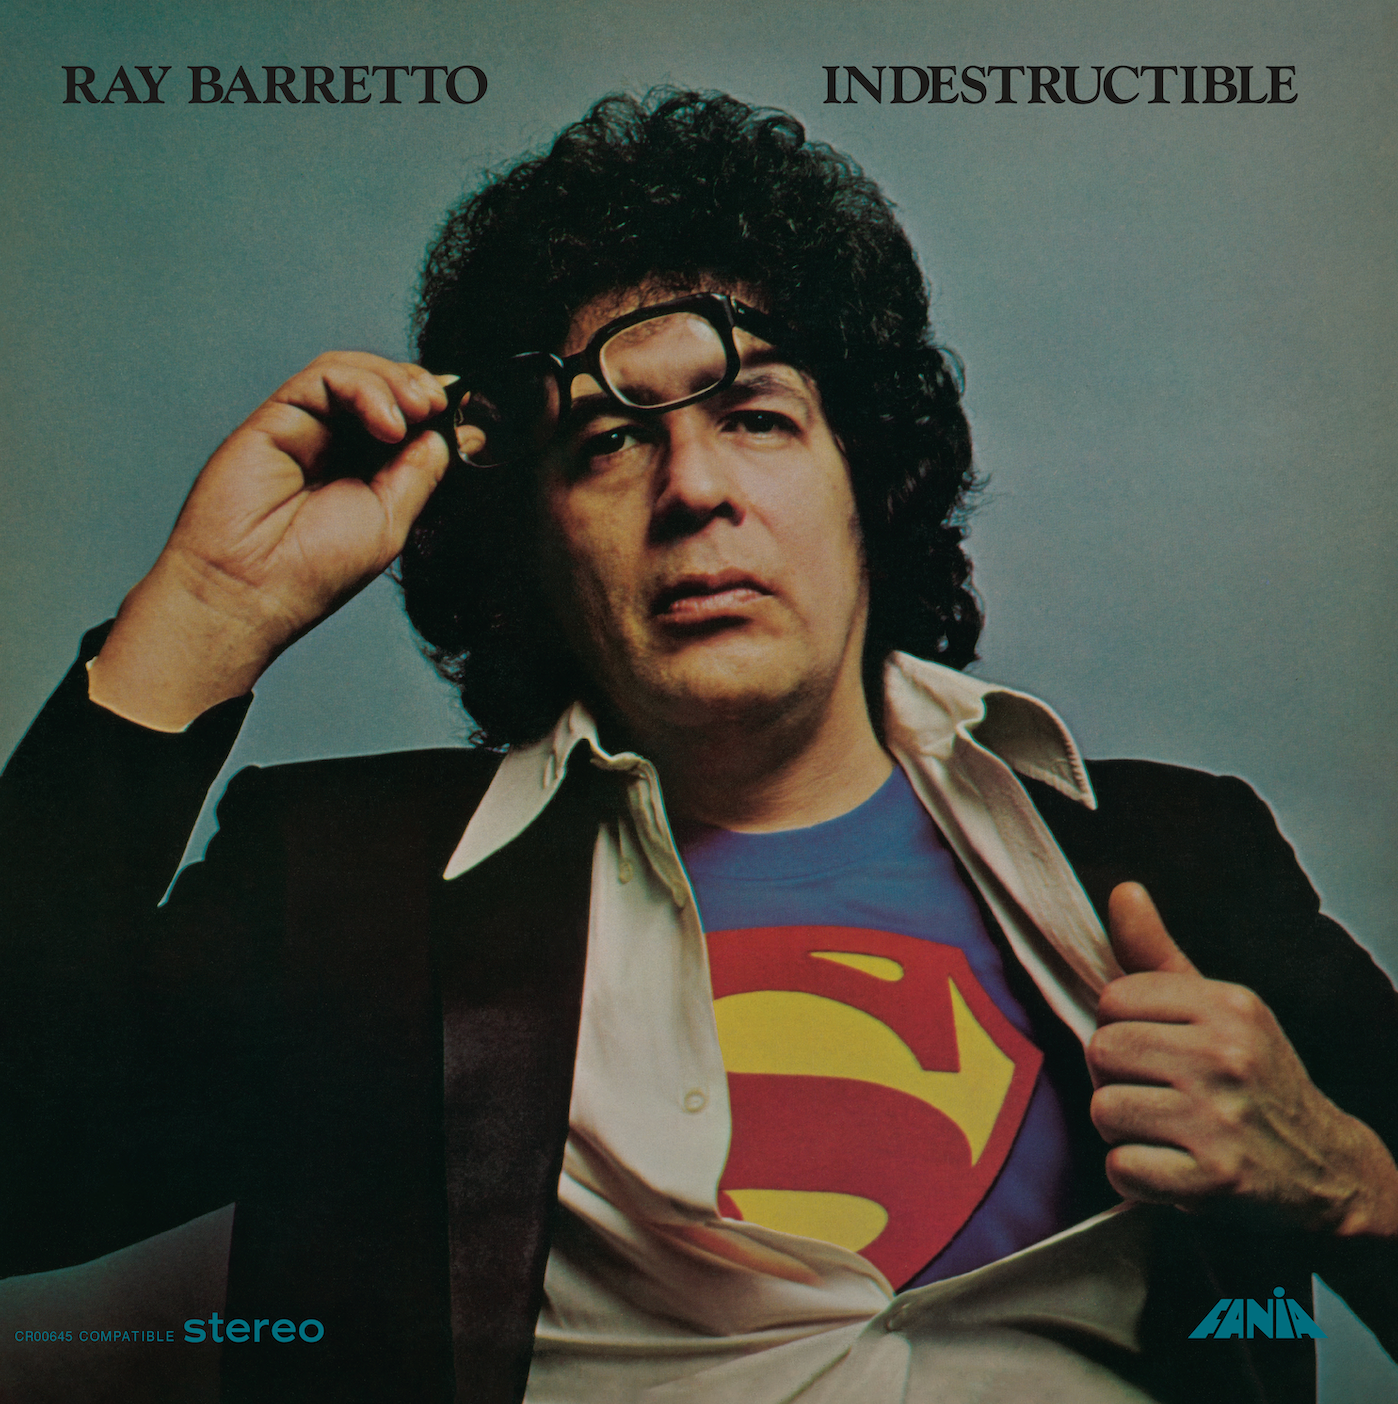 RAY BARRETTO'S INDESTRUCTIBLE RETURNS TO VINYL FOR 50TH